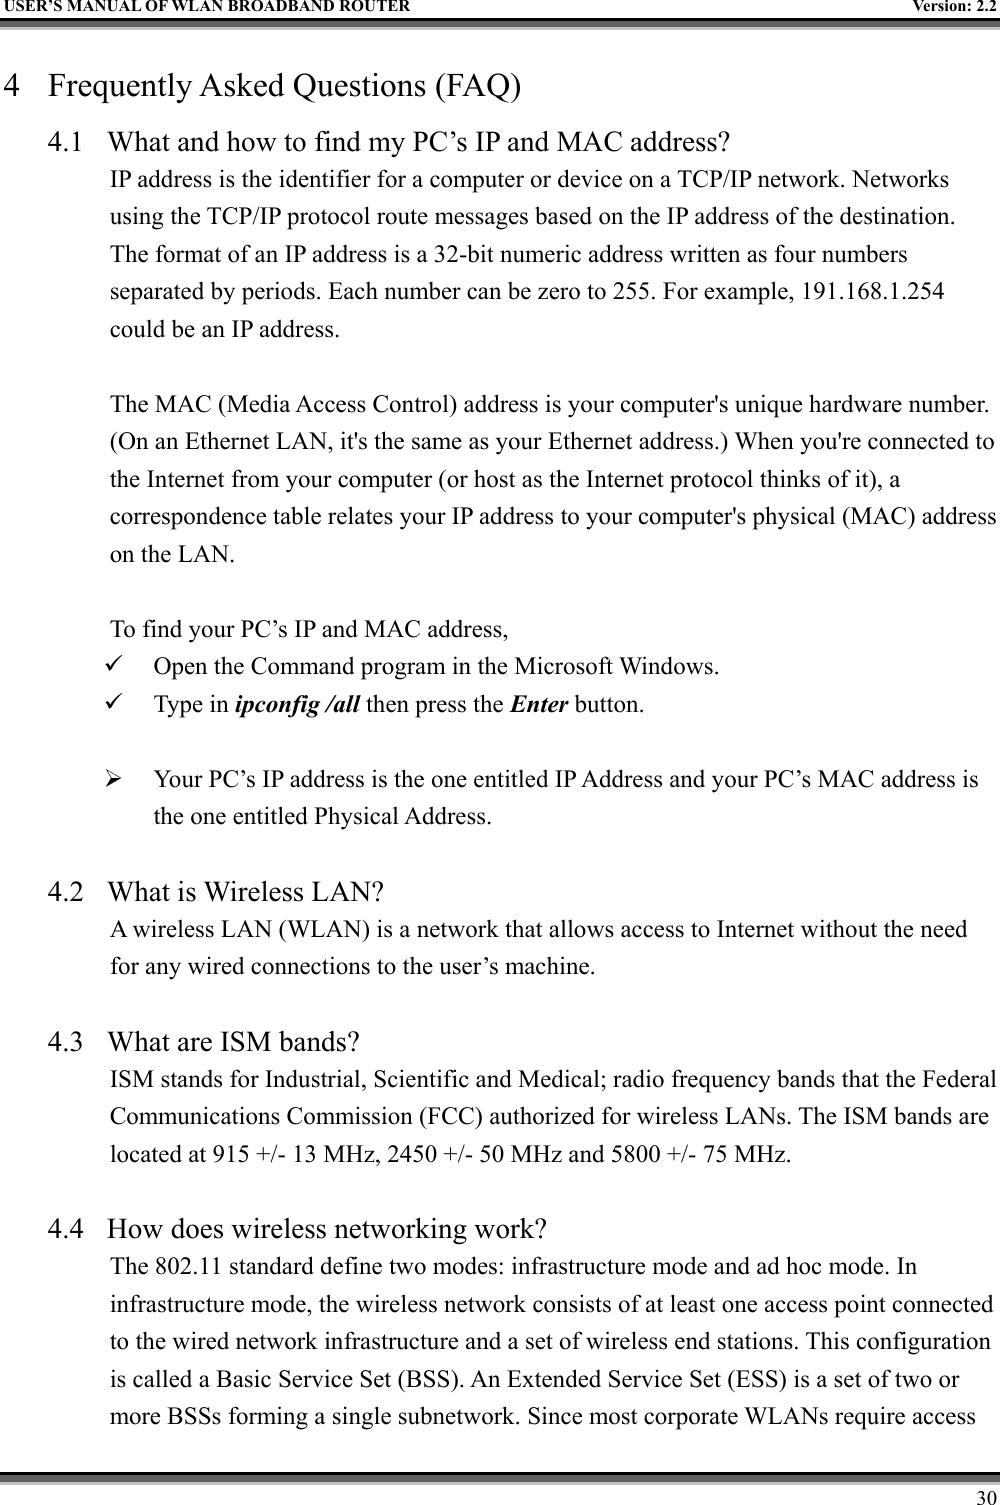   USER’S MANUAL OF WLAN BROADBAND ROUTER    Version: 2.2     30 4  Frequently Asked Questions (FAQ) 4.1  What and how to find my PC’s IP and MAC address? IP address is the identifier for a computer or device on a TCP/IP network. Networks using the TCP/IP protocol route messages based on the IP address of the destination. The format of an IP address is a 32-bit numeric address written as four numbers separated by periods. Each number can be zero to 255. For example, 191.168.1.254 could be an IP address.  The MAC (Media Access Control) address is your computer&apos;s unique hardware number. (On an Ethernet LAN, it&apos;s the same as your Ethernet address.) When you&apos;re connected to the Internet from your computer (or host as the Internet protocol thinks of it), a correspondence table relates your IP address to your computer&apos;s physical (MAC) address on the LAN.  To find your PC’s IP and MAC address,   Open the Command program in the Microsoft Windows.   Type in ipconfig /all then press the Enter button.    Your PC’s IP address is the one entitled IP Address and your PC’s MAC address is the one entitled Physical Address.  4.2  What is Wireless LAN?   A wireless LAN (WLAN) is a network that allows access to Internet without the need for any wired connections to the user’s machine.    4.3  What are ISM bands?   ISM stands for Industrial, Scientific and Medical; radio frequency bands that the Federal Communications Commission (FCC) authorized for wireless LANs. The ISM bands are located at 915 +/- 13 MHz, 2450 +/- 50 MHz and 5800 +/- 75 MHz.    4.4  How does wireless networking work?   The 802.11 standard define two modes: infrastructure mode and ad hoc mode. In infrastructure mode, the wireless network consists of at least one access point connected to the wired network infrastructure and a set of wireless end stations. This configuration is called a Basic Service Set (BSS). An Extended Service Set (ESS) is a set of two or more BSSs forming a single subnetwork. Since most corporate WLANs require access 